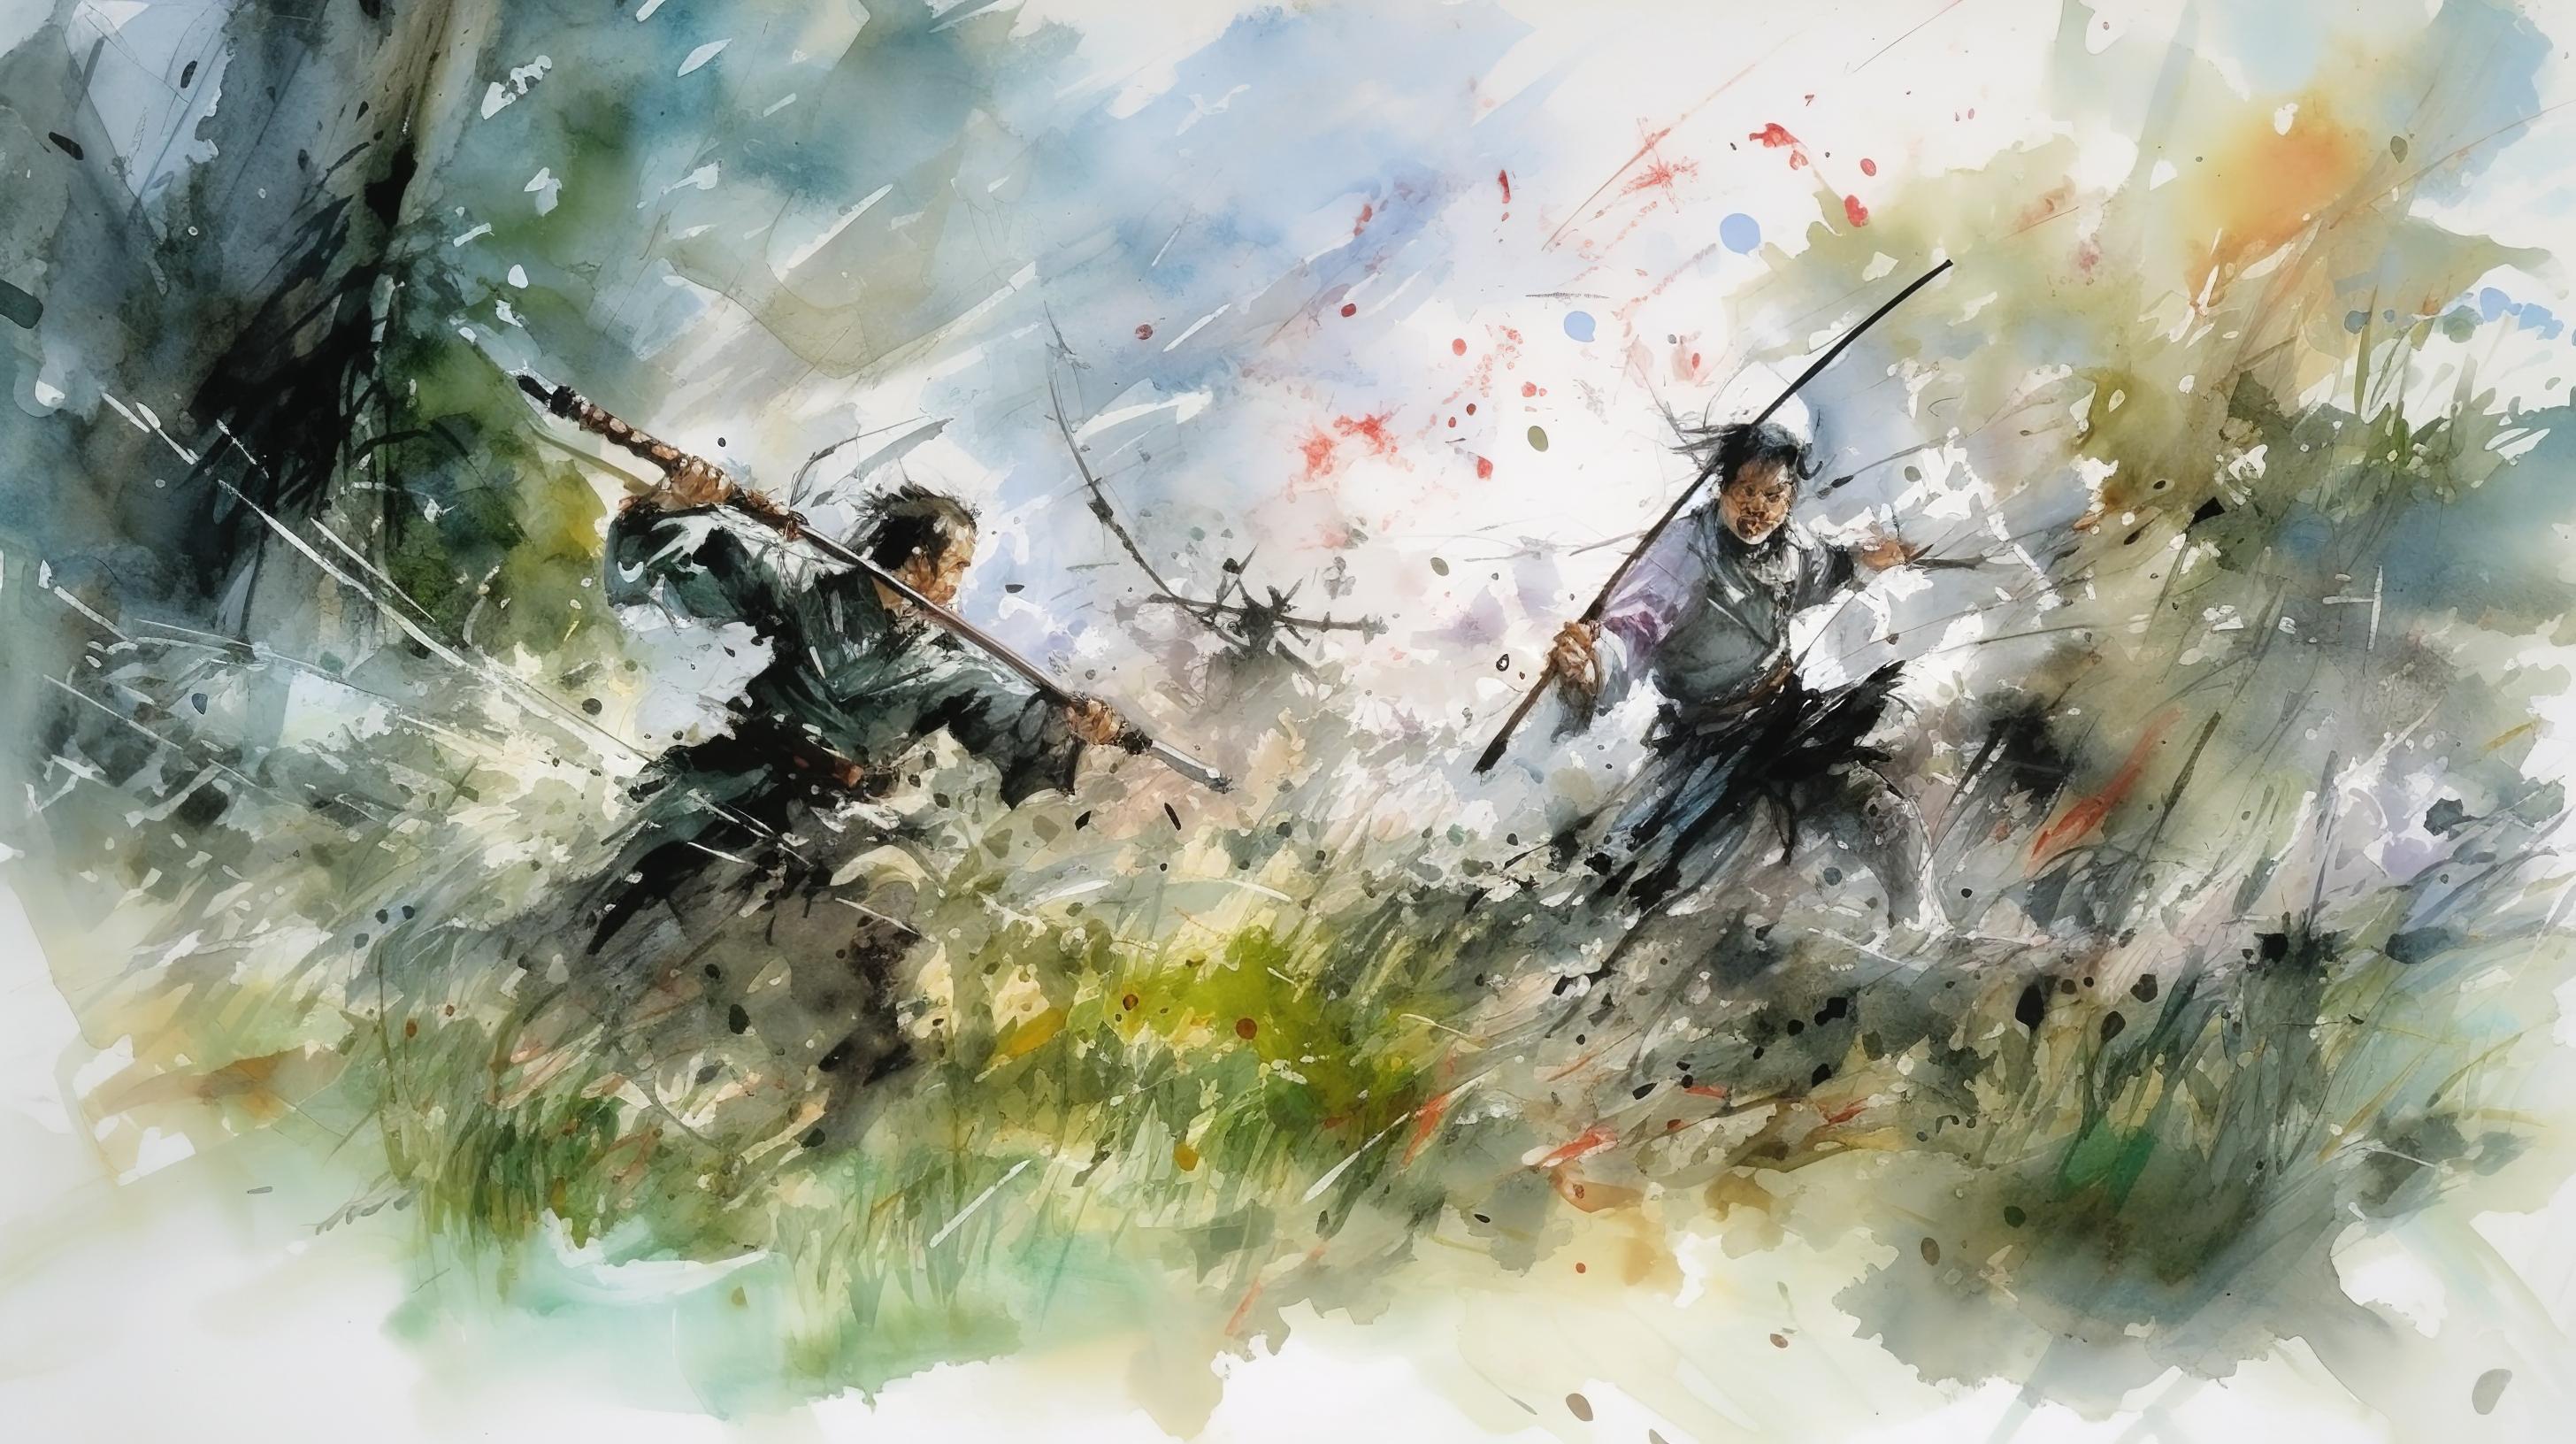 action_film_of_wo_swordsmen_fighting_by_wu_guanzhong_by_william-gigapixel-scale-2_00x_19.jpg